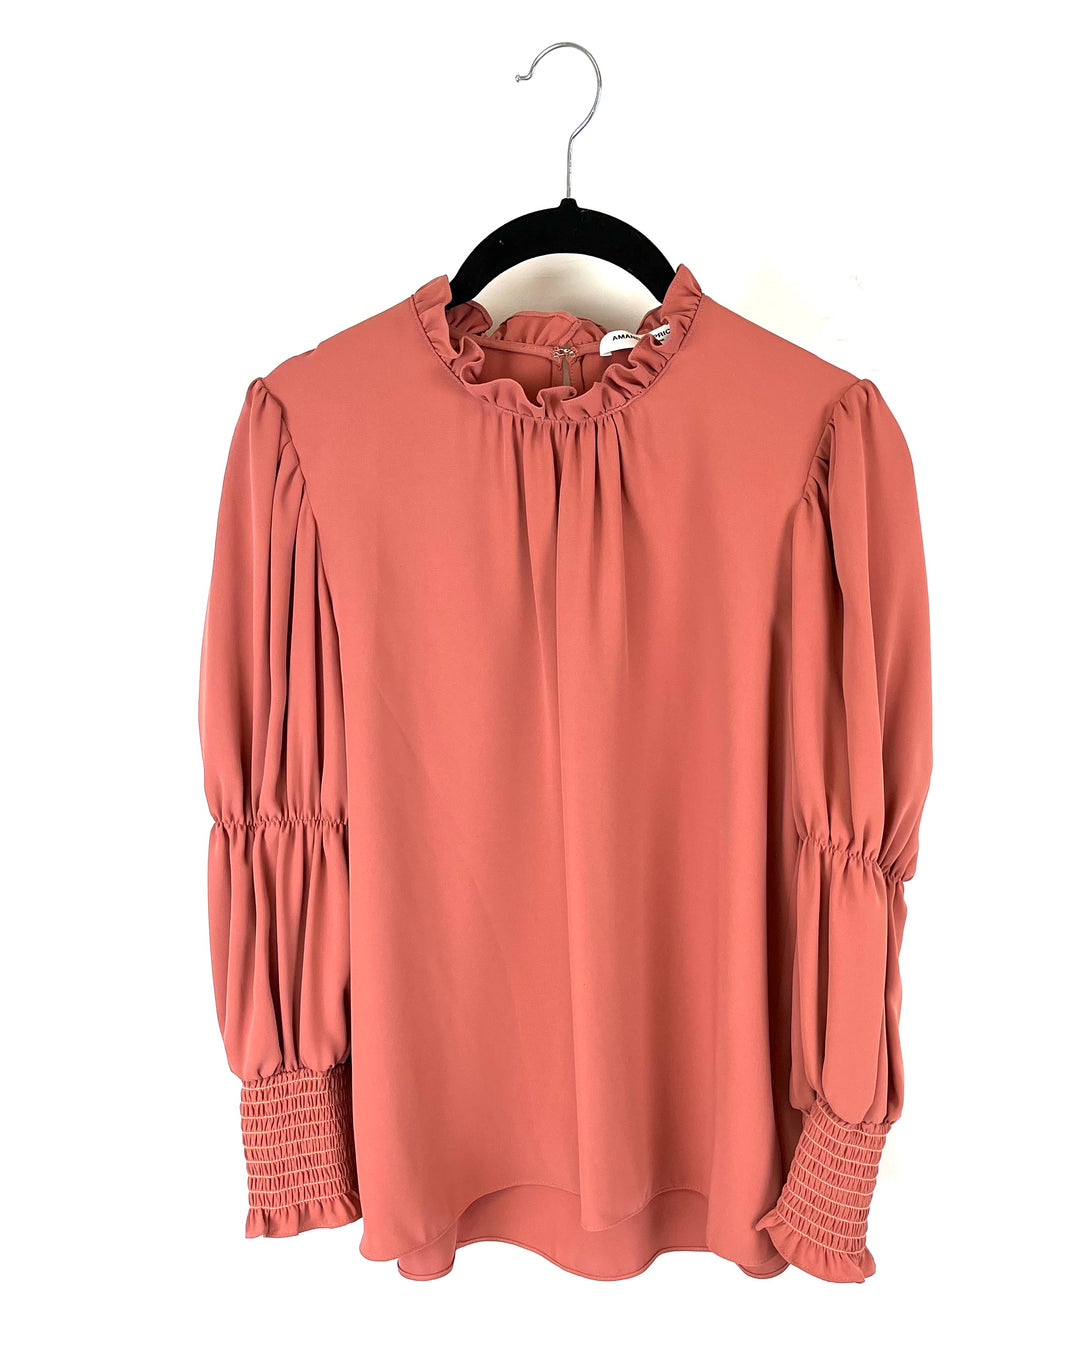 Salmon Colored Long Sleeve Blouse - Small